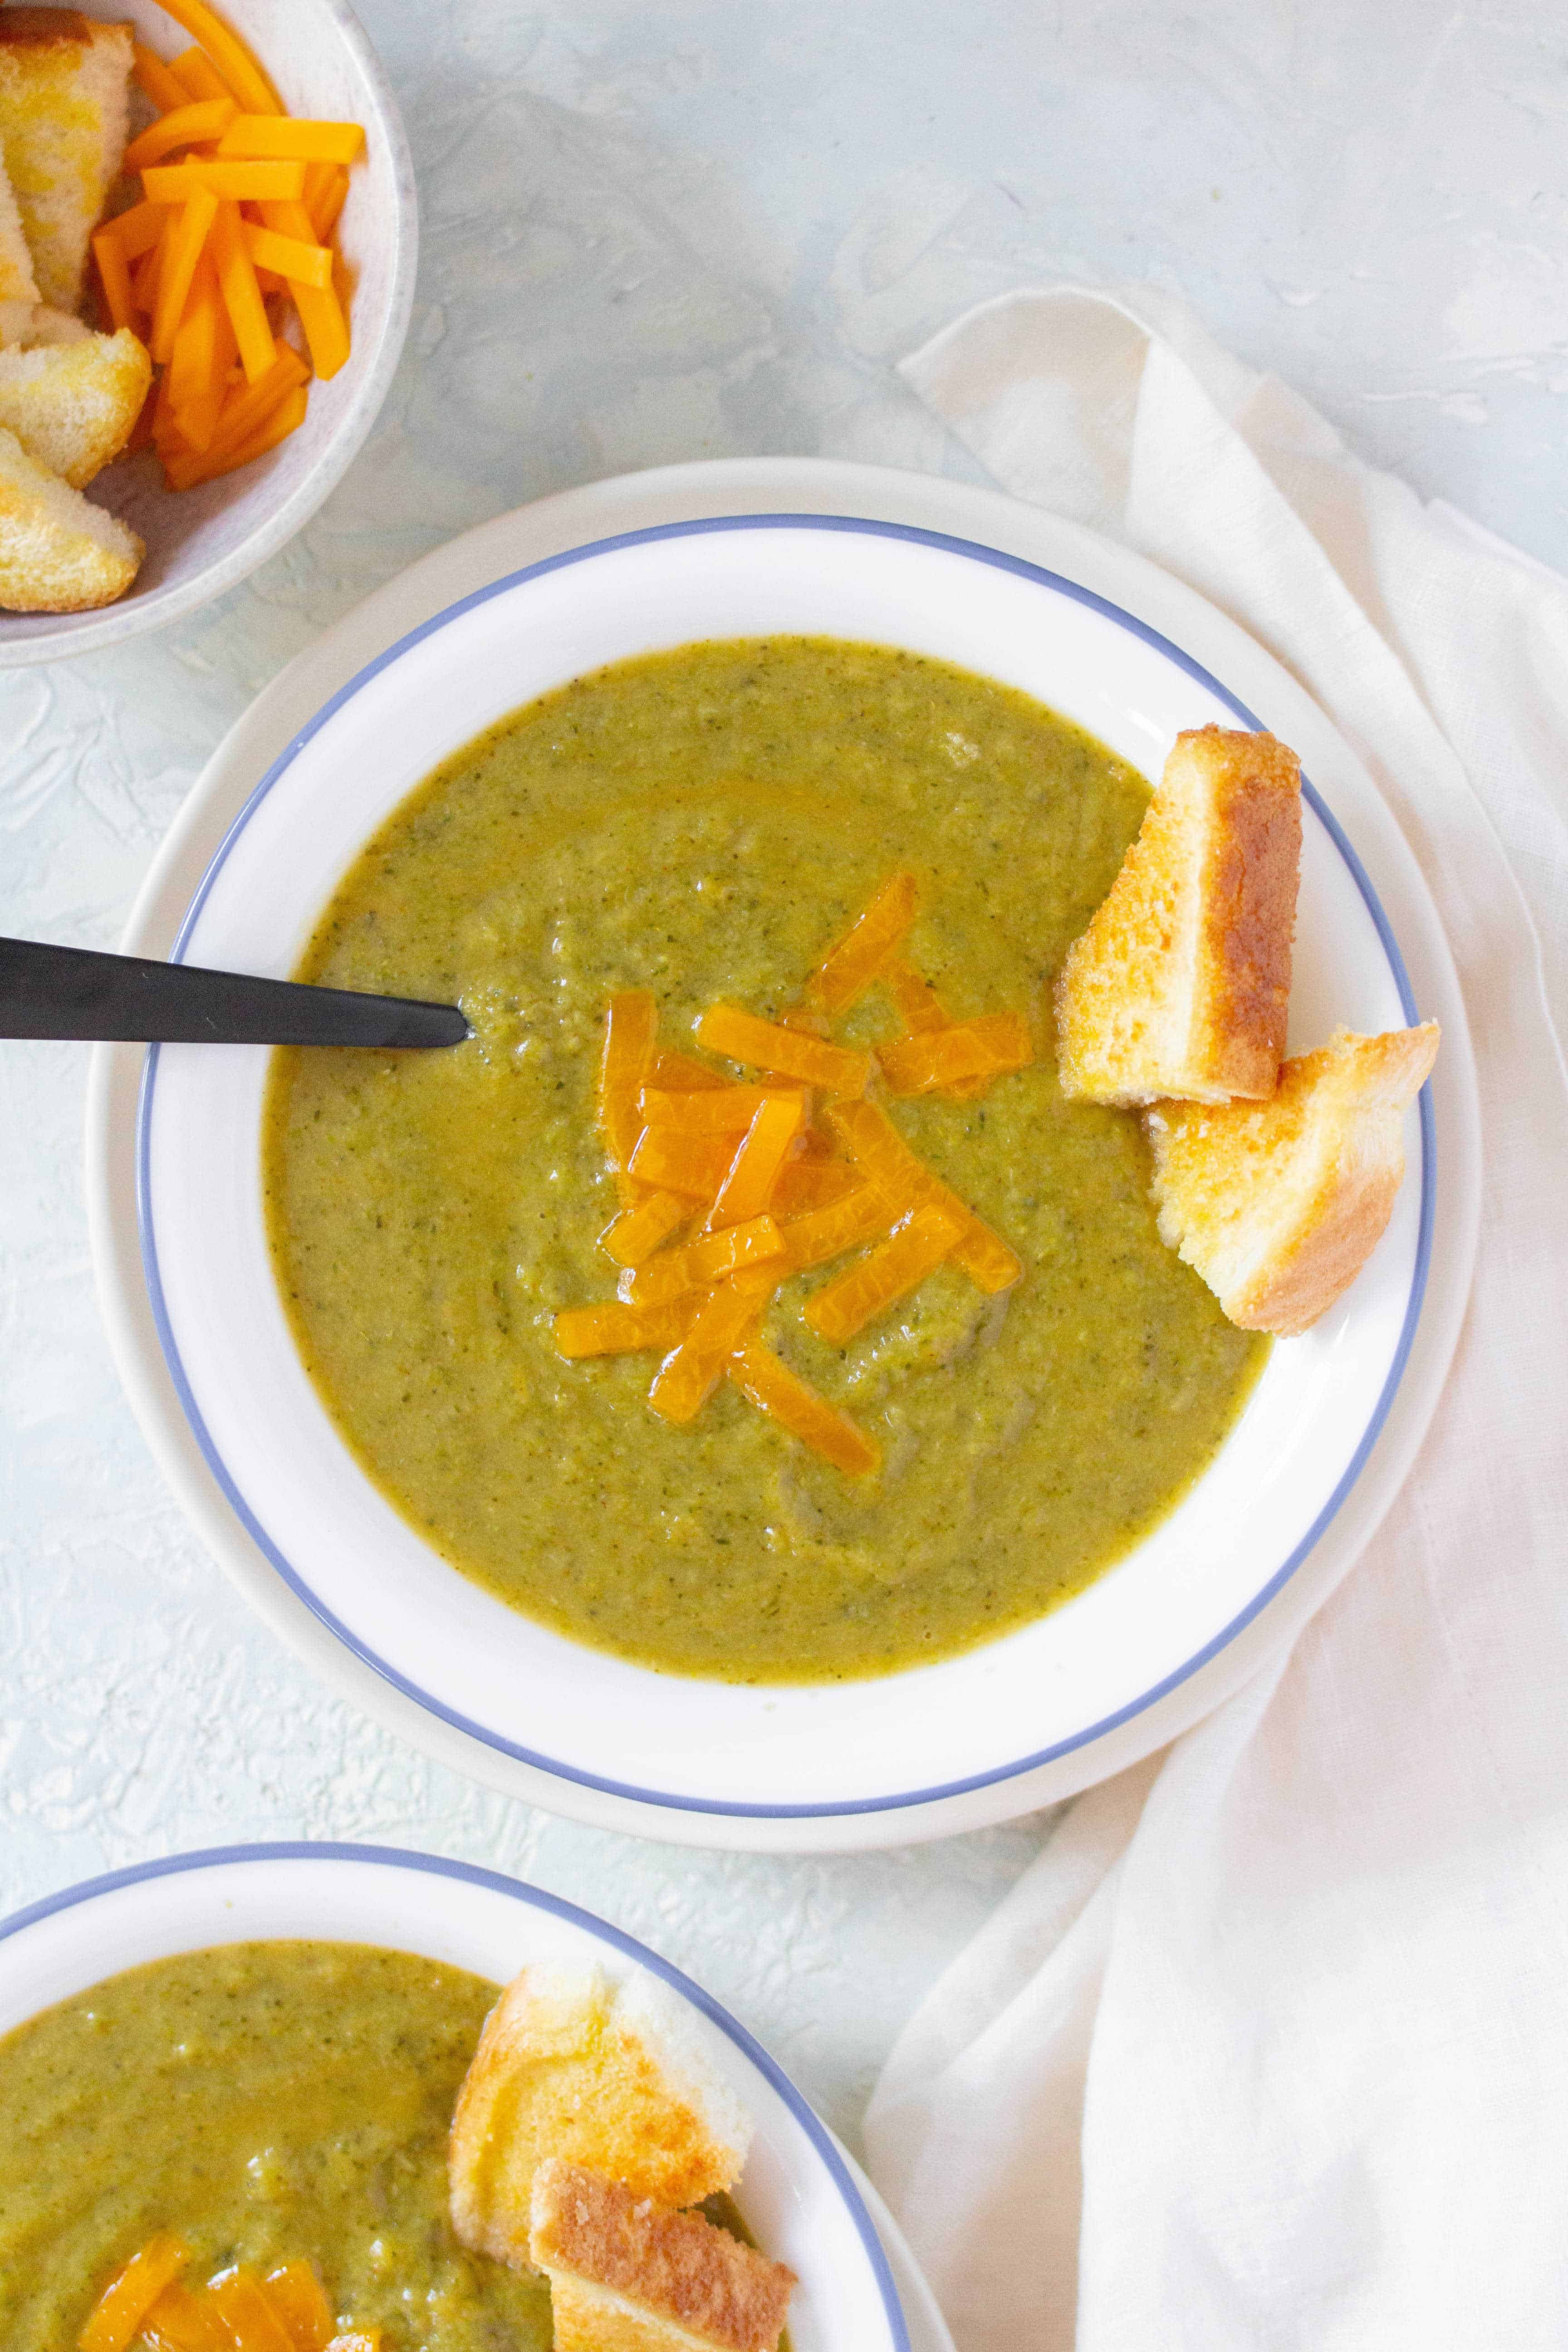 Craving some soup? Try this Instant Pot Broccolini Broccoli Cheddar Soup that takes under 15 minutes to make!